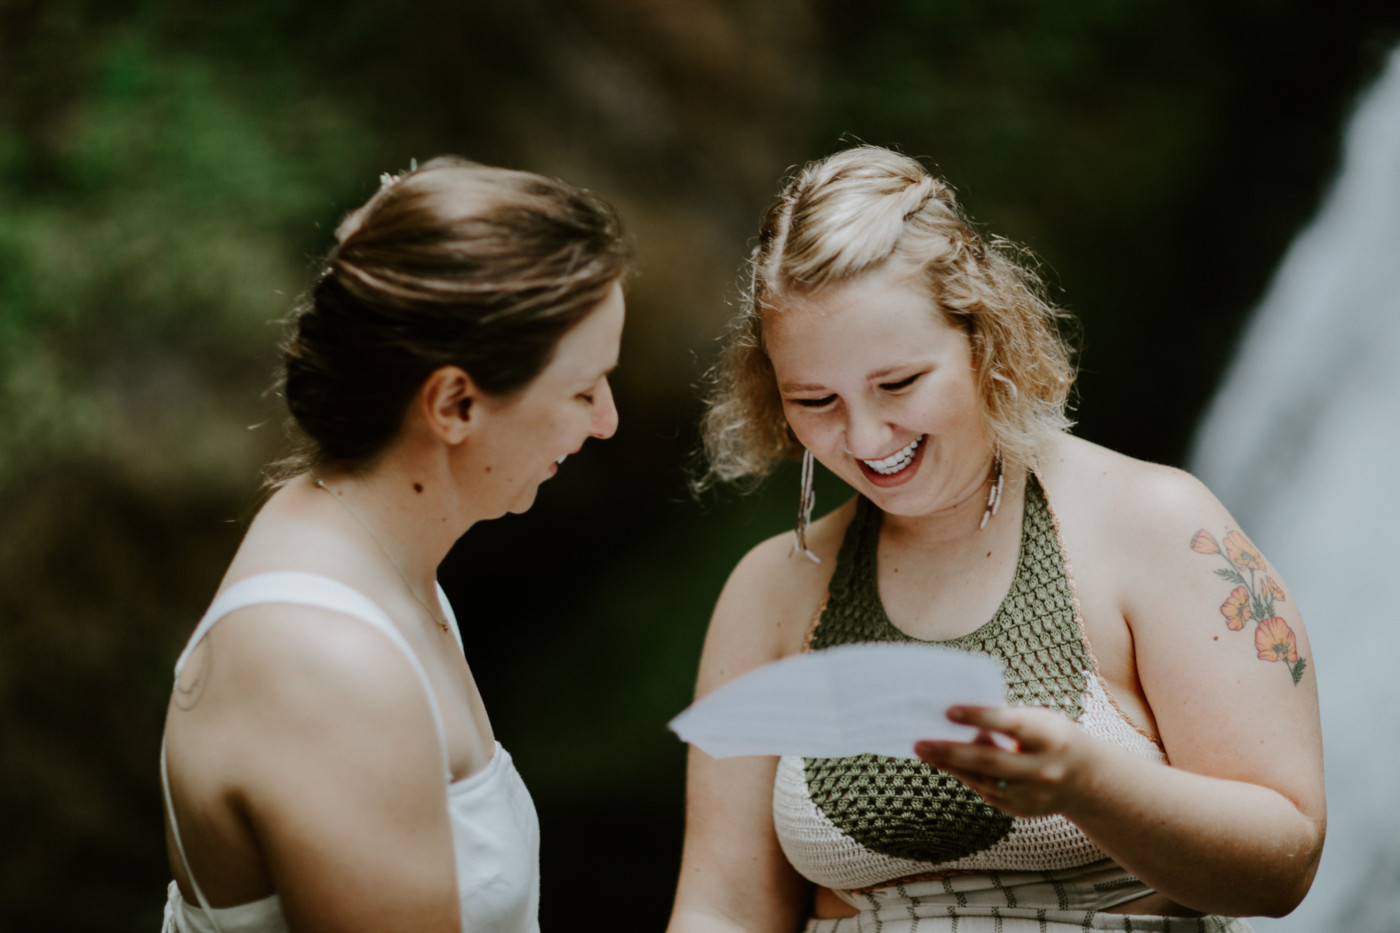 Kate reads her vows to Audrey in front of the waterfall at Bridal Veil Falls. Elopement wedding photography at Bridal Veil Falls by Sienna Plus Josh.